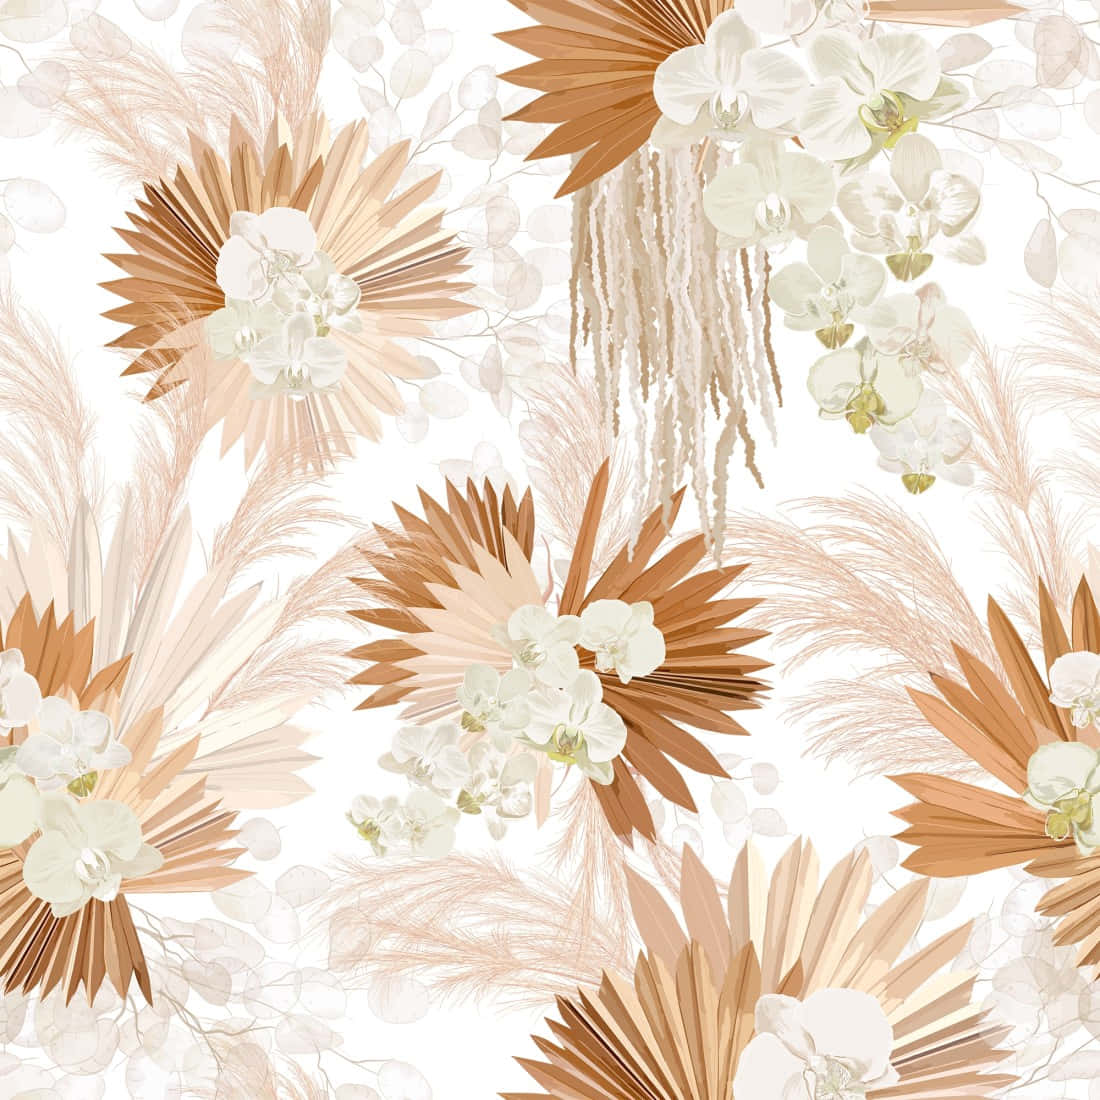 A White And Brown Floral Pattern With Flowers And Leaves Wallpaper